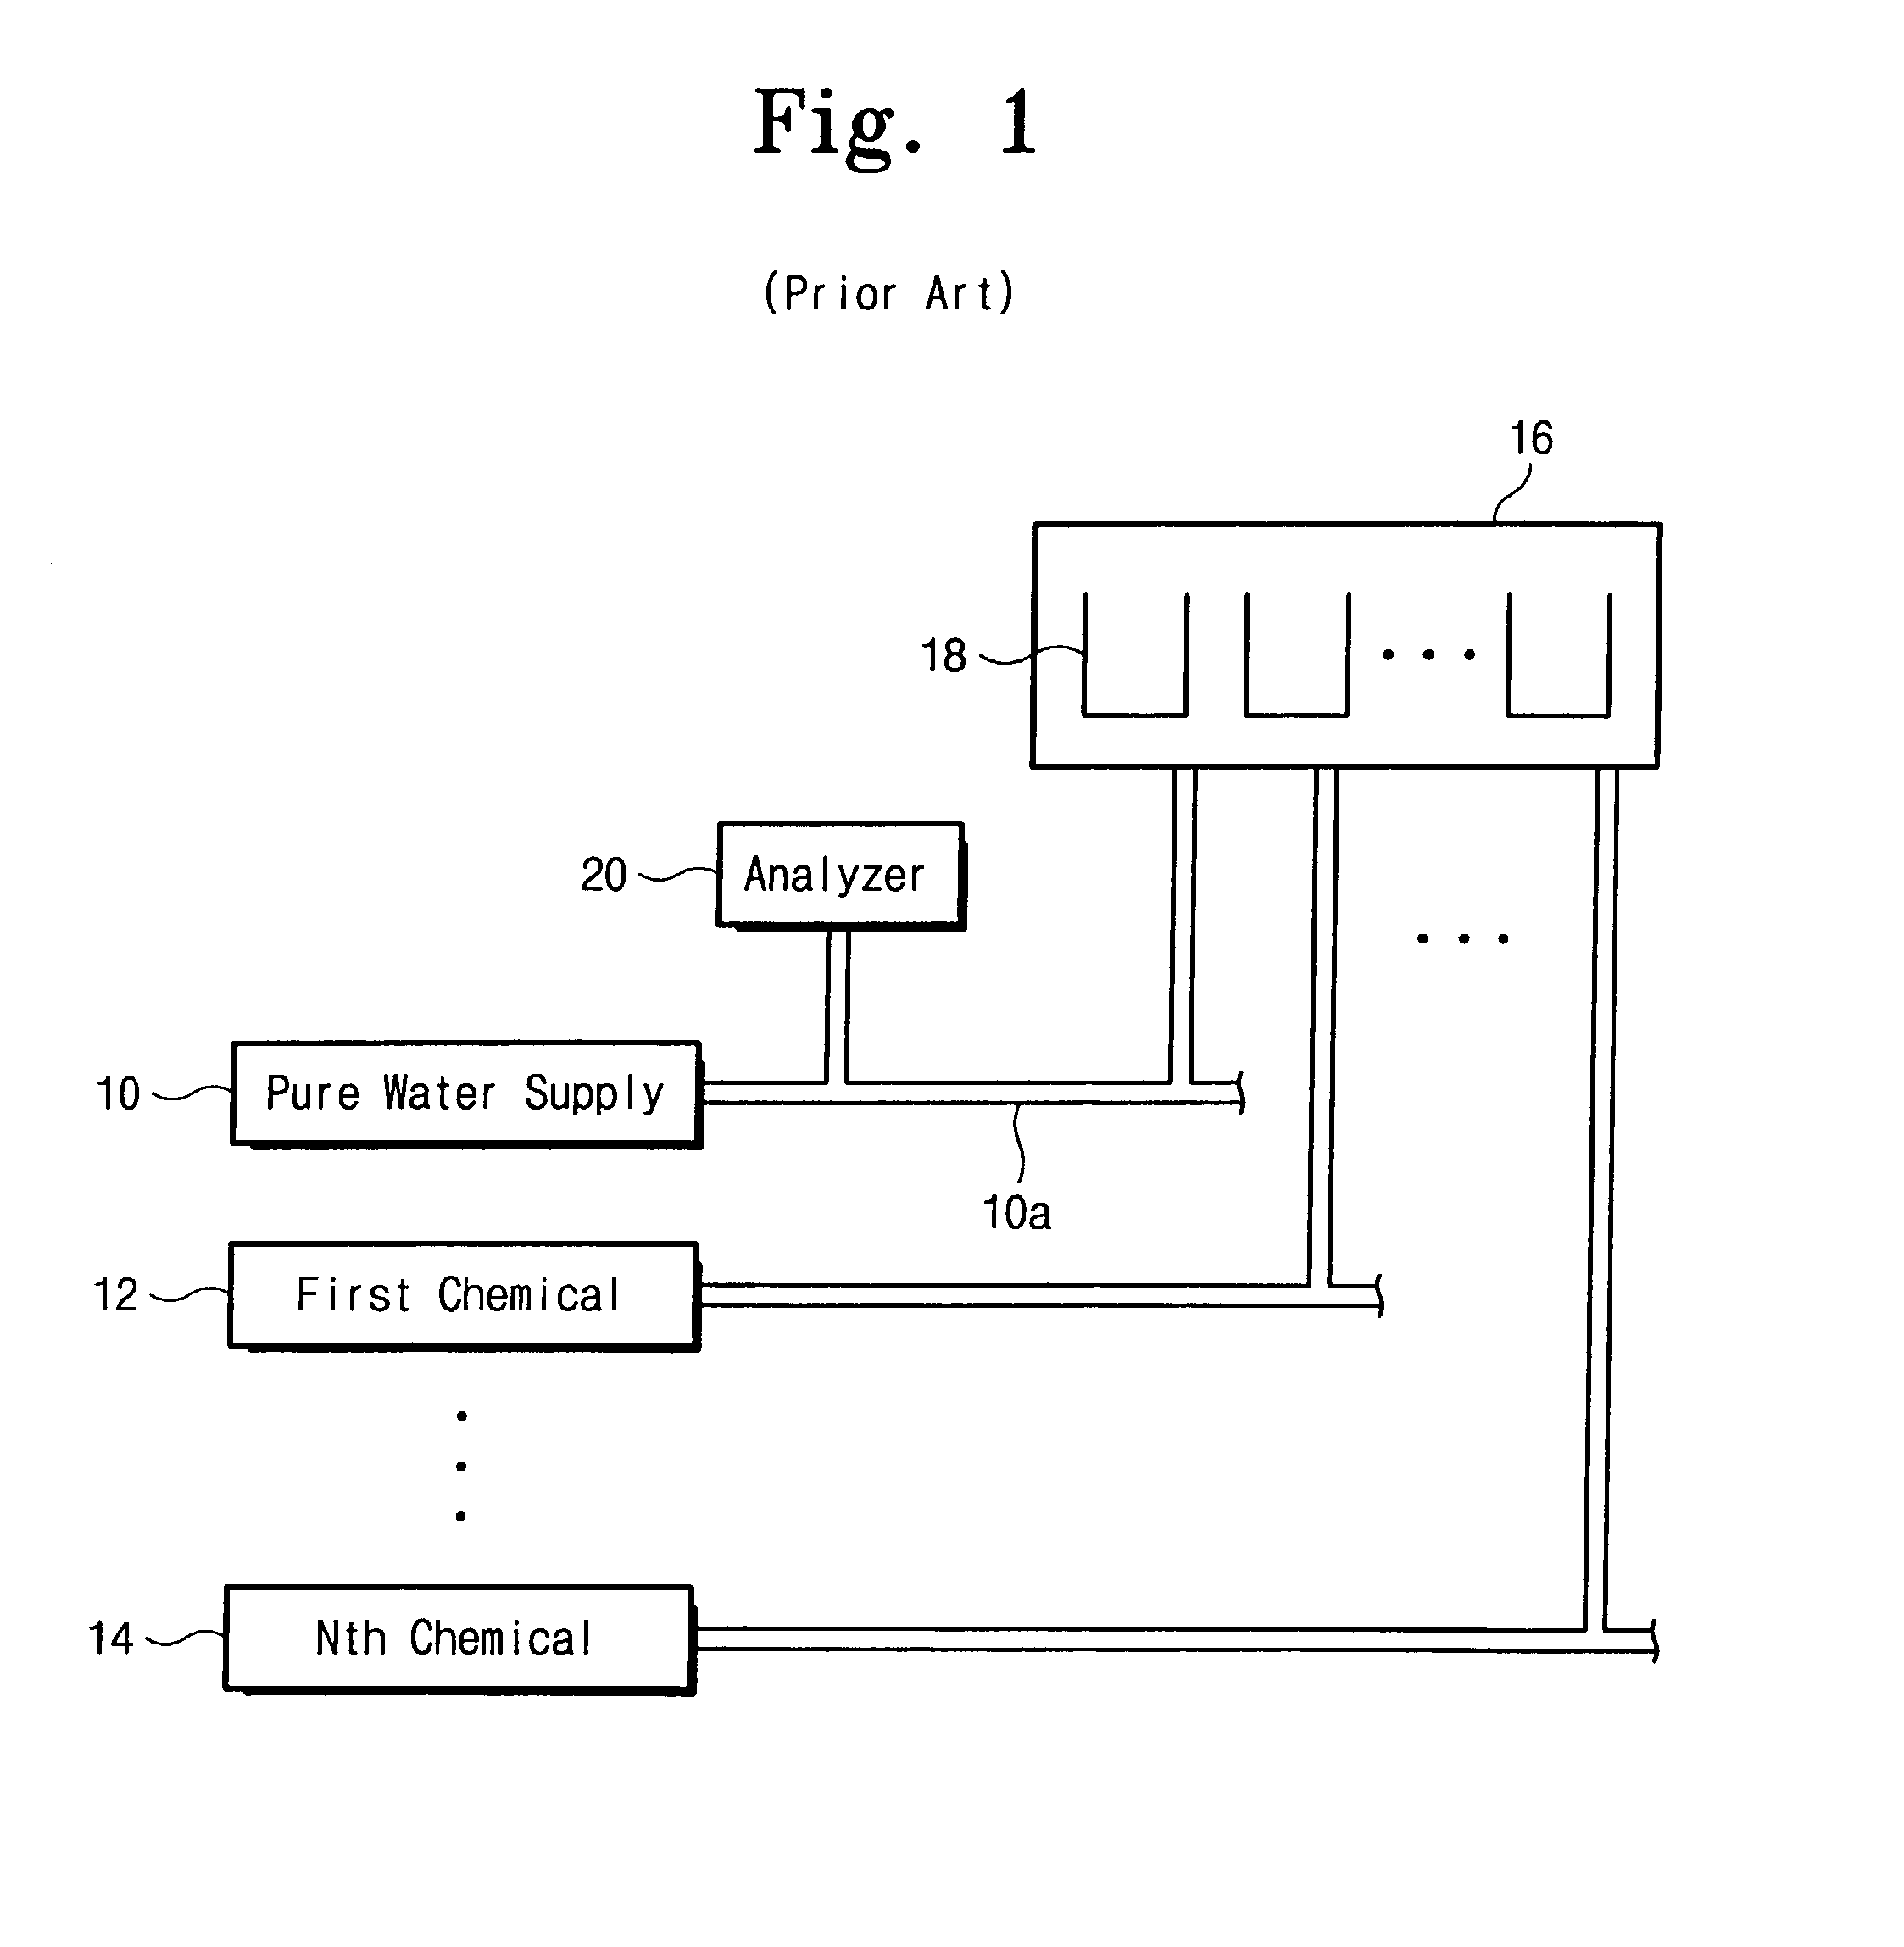 Method and apparatus for automatically measuring the concentration of TOC in a fluid used in a semiconductor manufacturing process